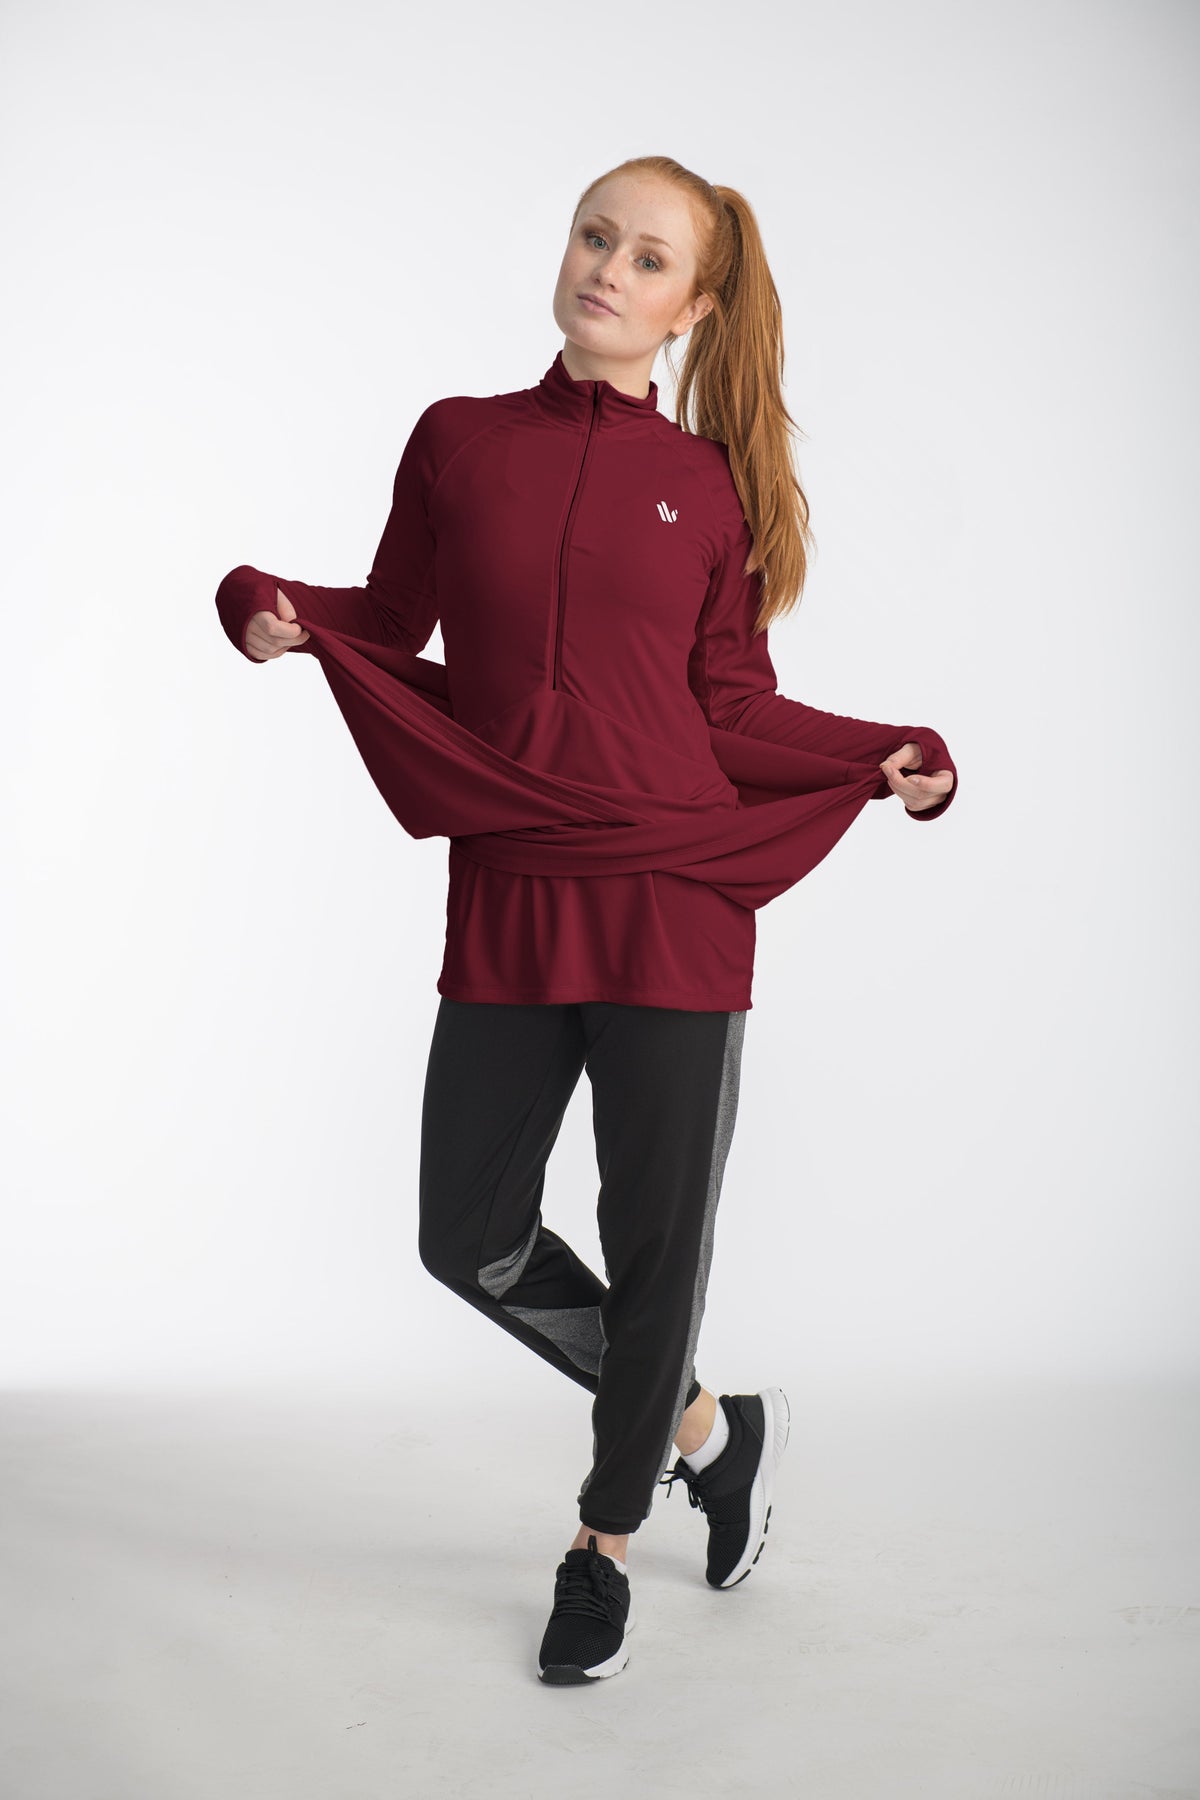 Maroon Athletic / Swim Skirt with built in leggings.  Modest swimwear,  Outfits with leggings, Athletic skirts